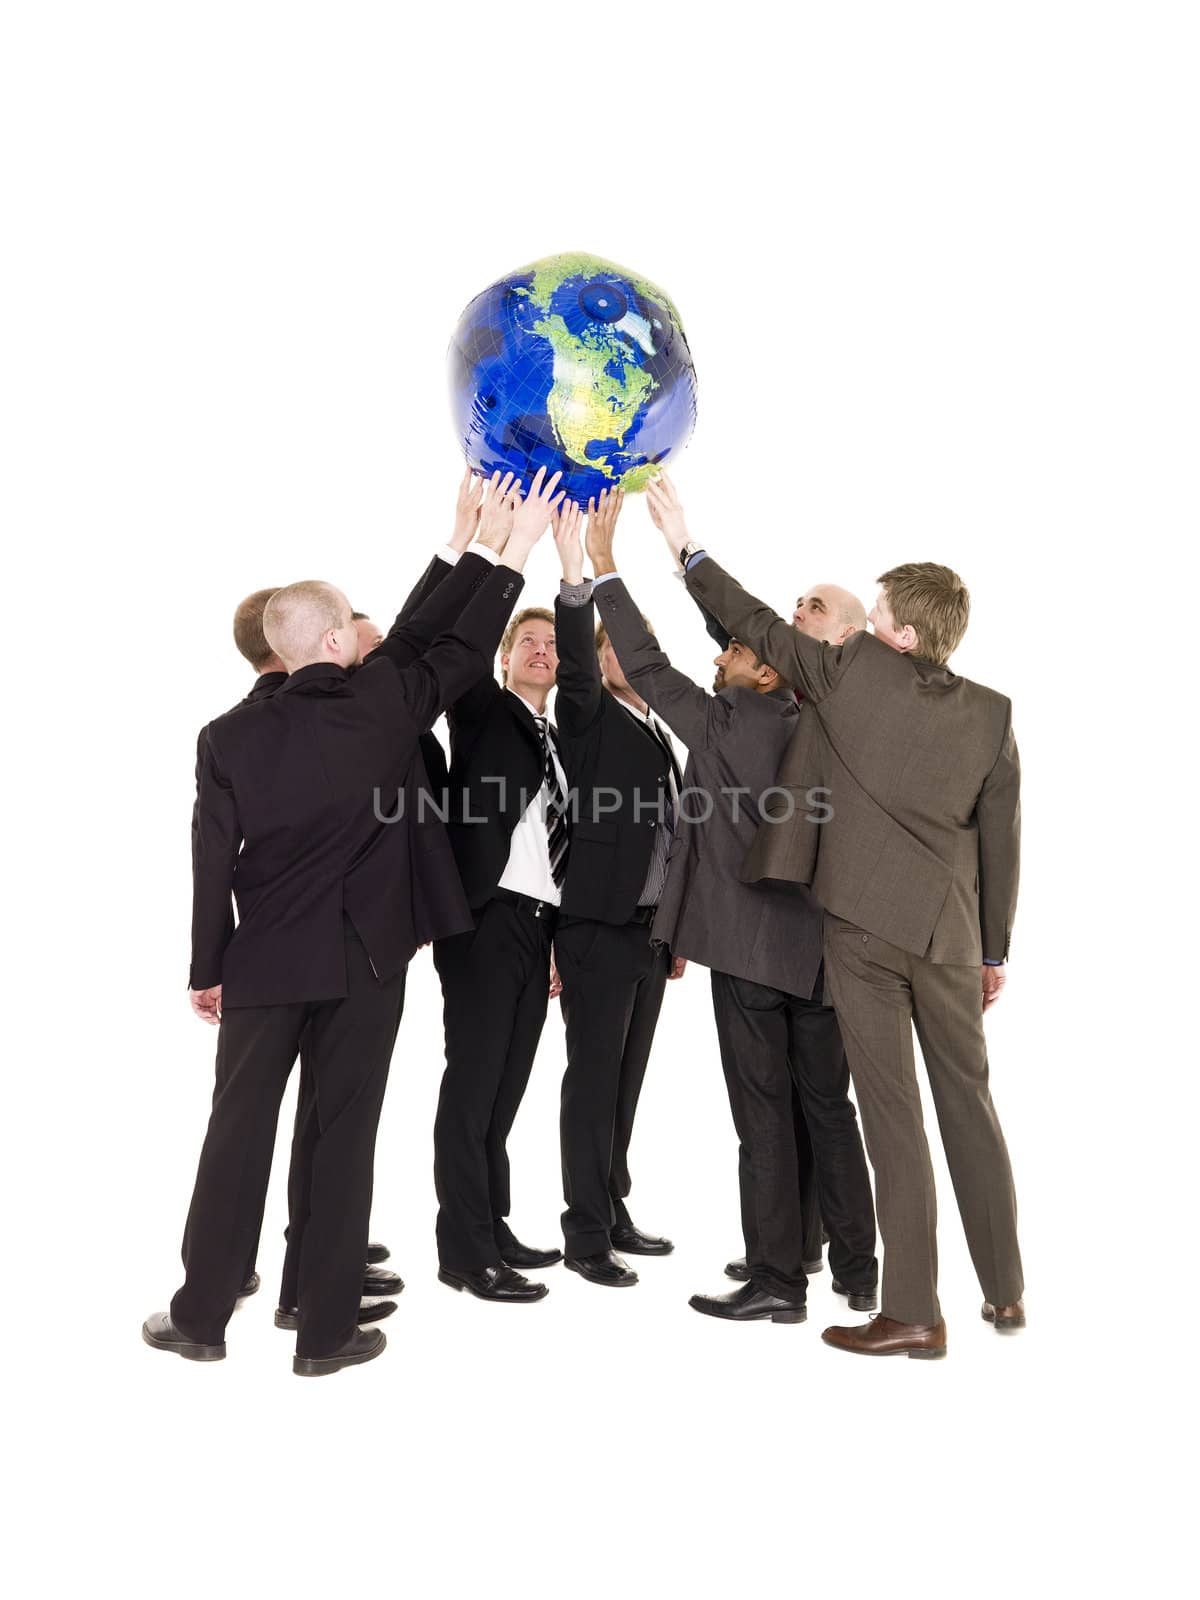 Group of men holding a terrestrial globe isolated on white background